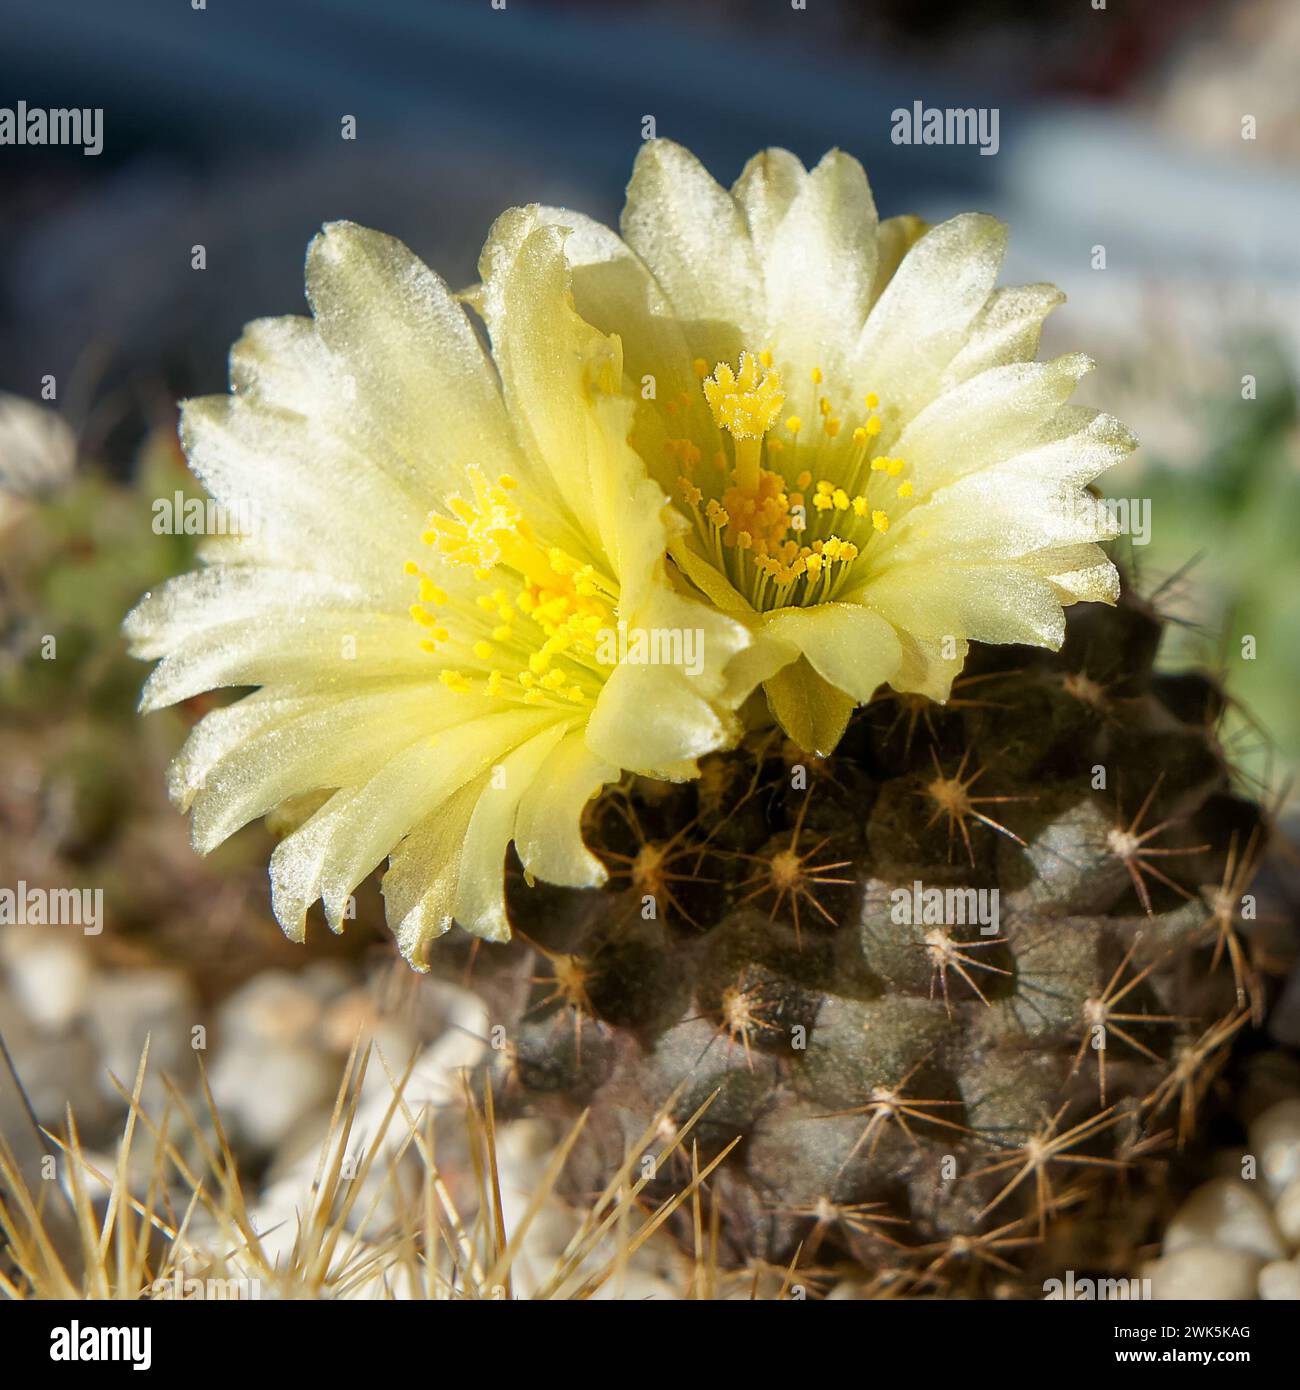 Chilean cactus Copiapoa humilis with two yellow flowers in close-up. A square-sized photo. Stock Photo